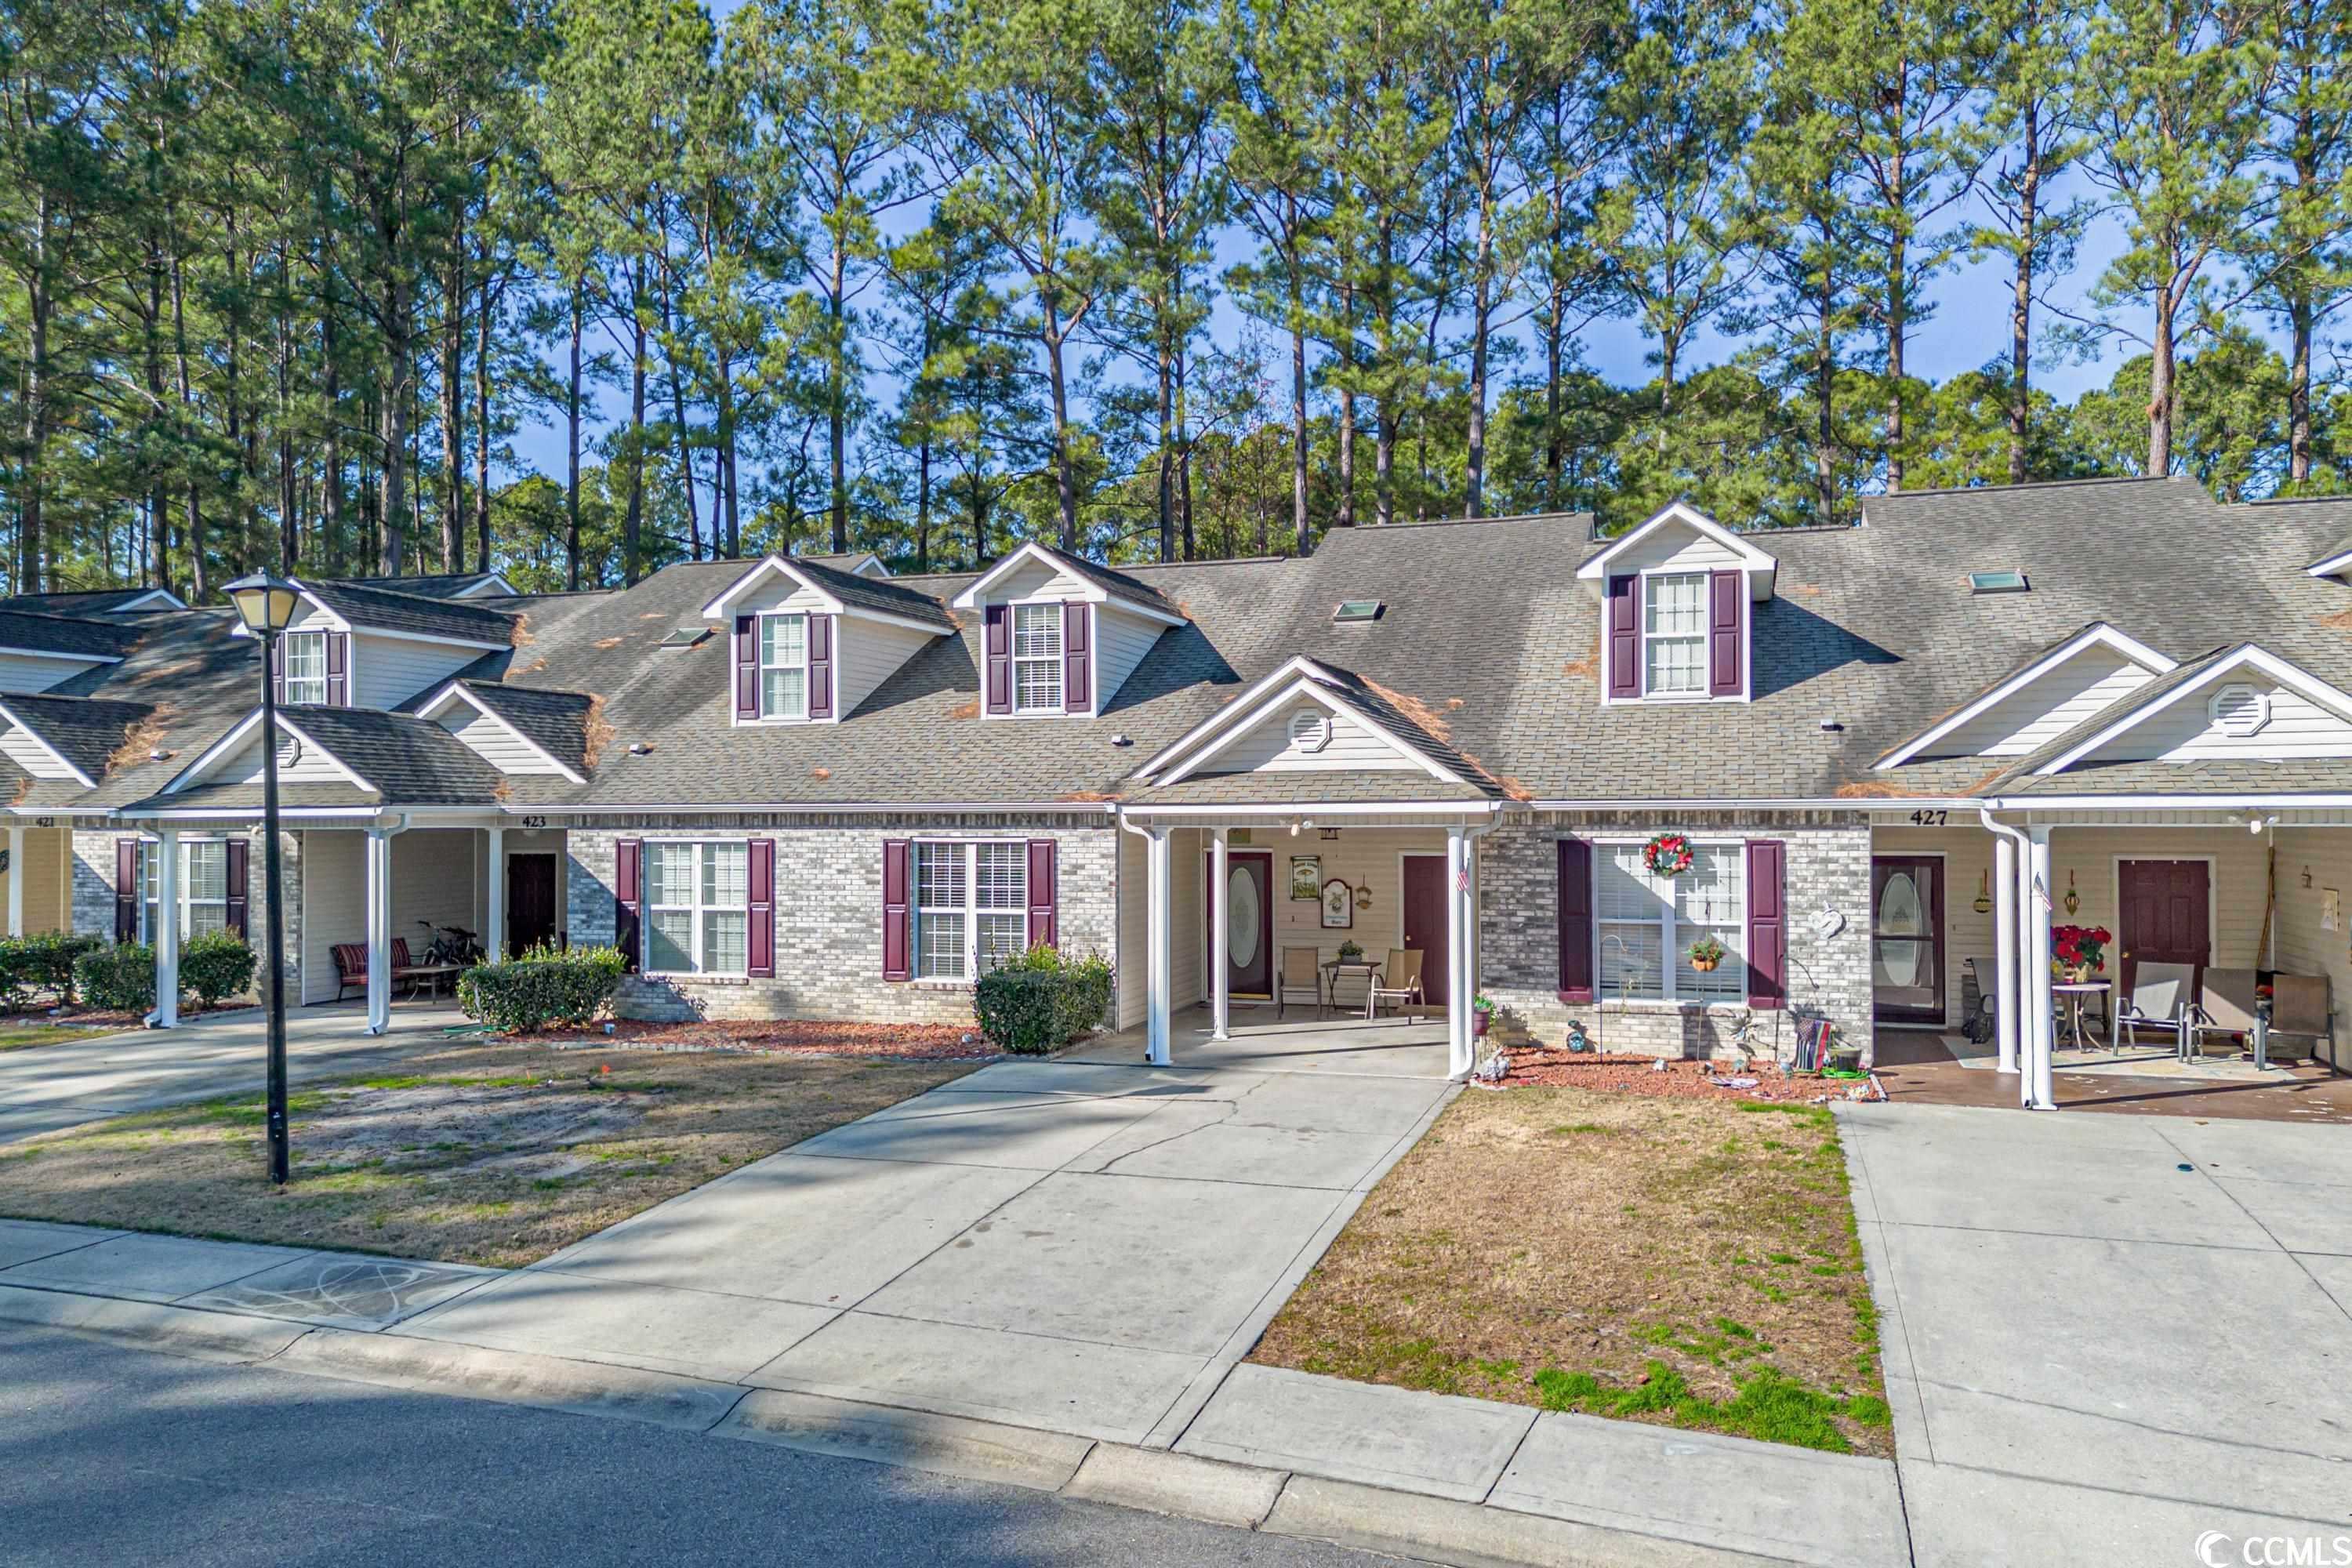 Photo one of 425 Colonial Trace Dr. # 1D Longs SC 29568 | MLS 2400270